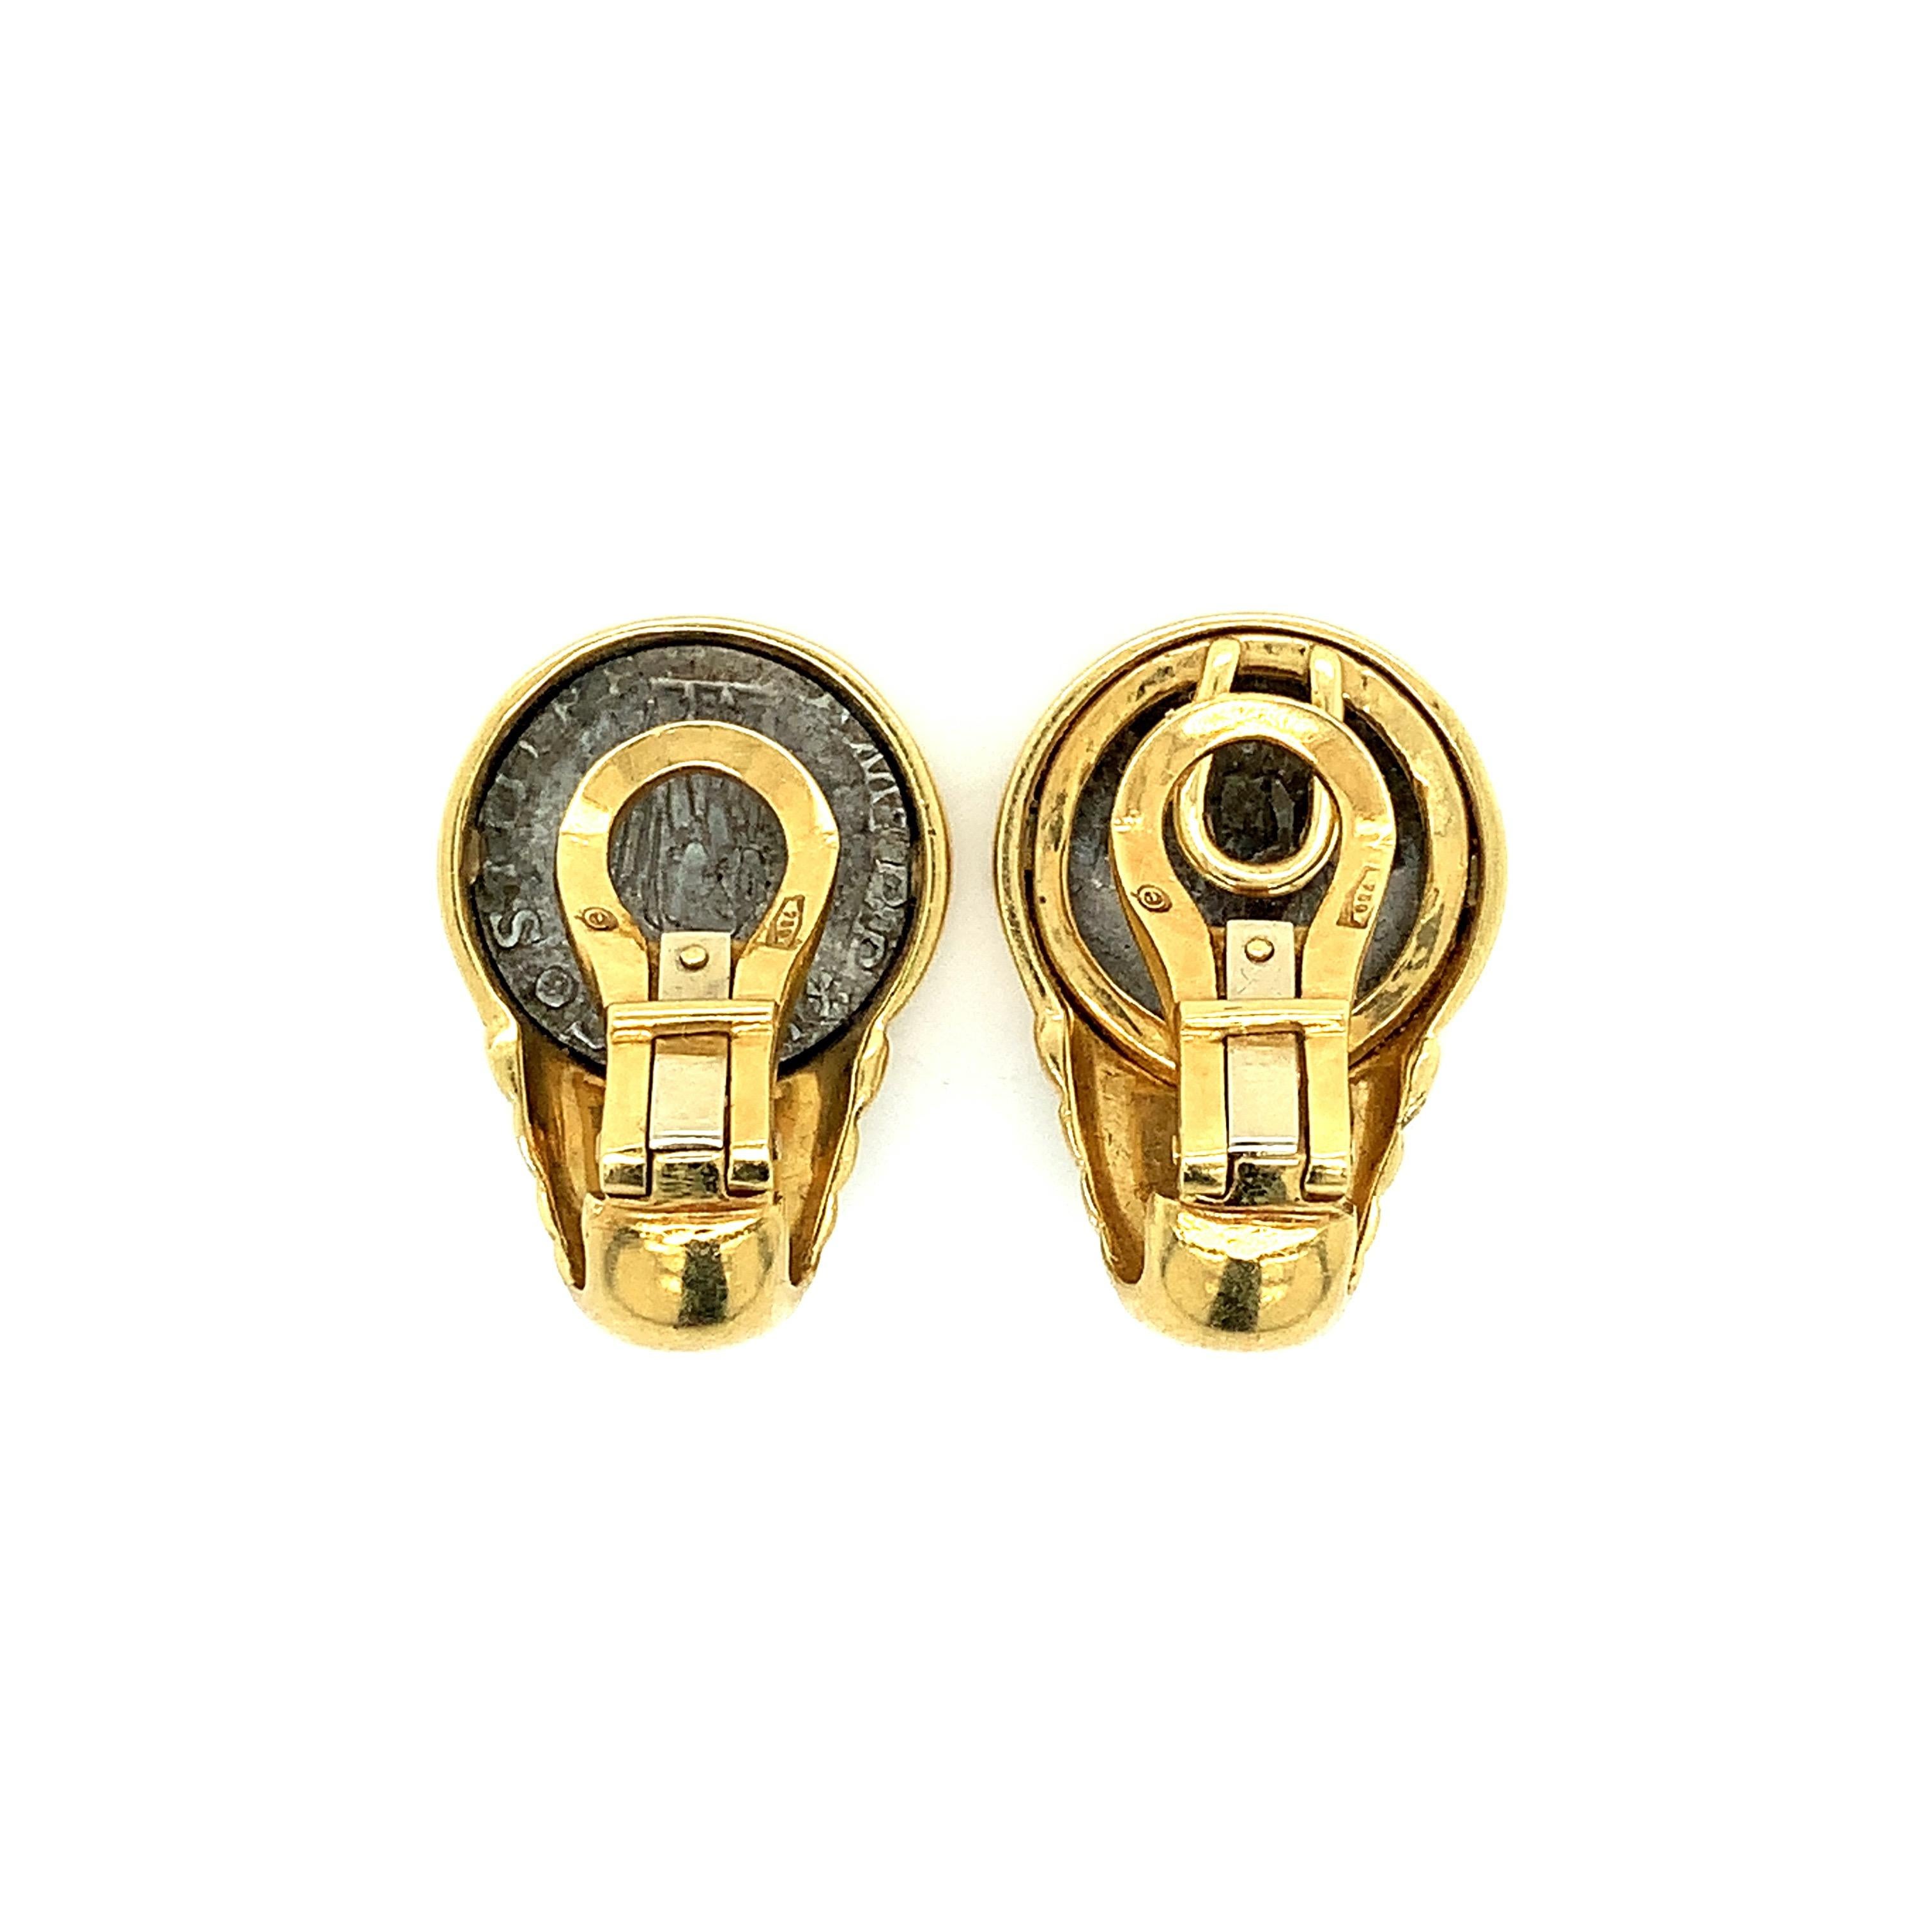 A pair of 18 karat yellow gold ear clips with a replica of Roman coins at their center. Total weight: 24.2 grams. Width: 1.8 cm. Length: 2.6 cm.  